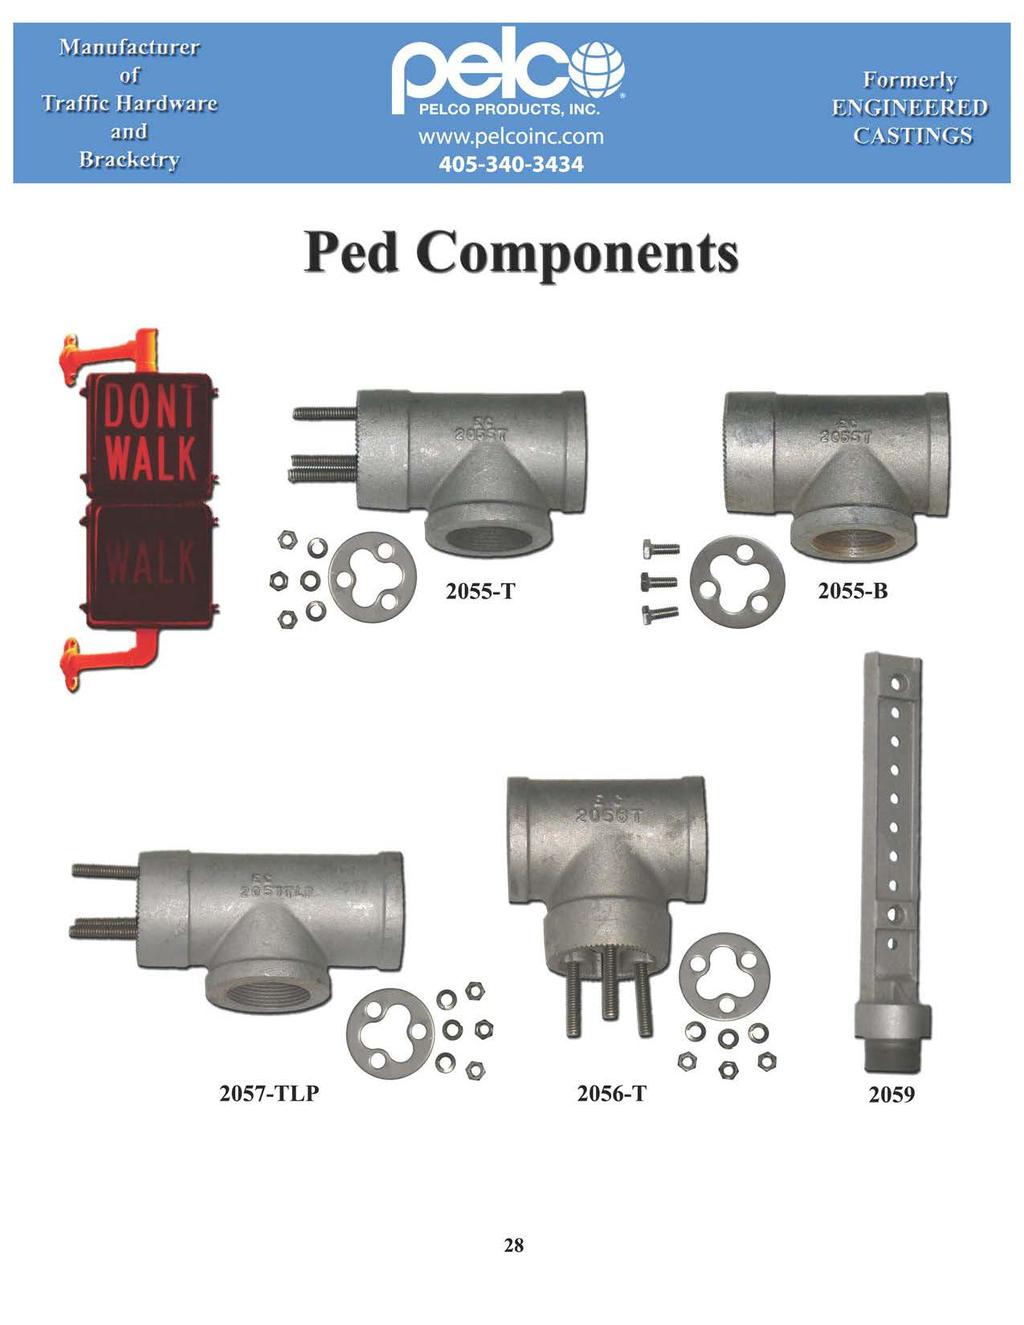 Ped Components OoO 255-T oo rj::=lo\ :::